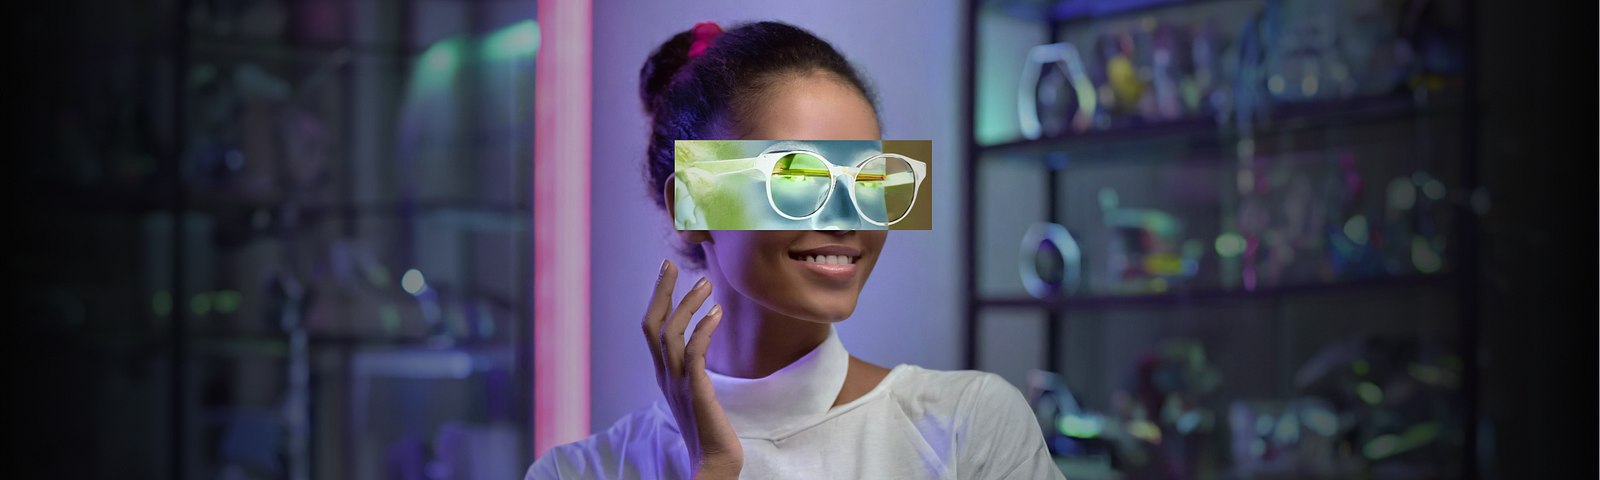 Smiling young woman using augmented reality to try on digital eyeglasses, showcasing the innovative AR technology in eyewear shopping with Designhubz.